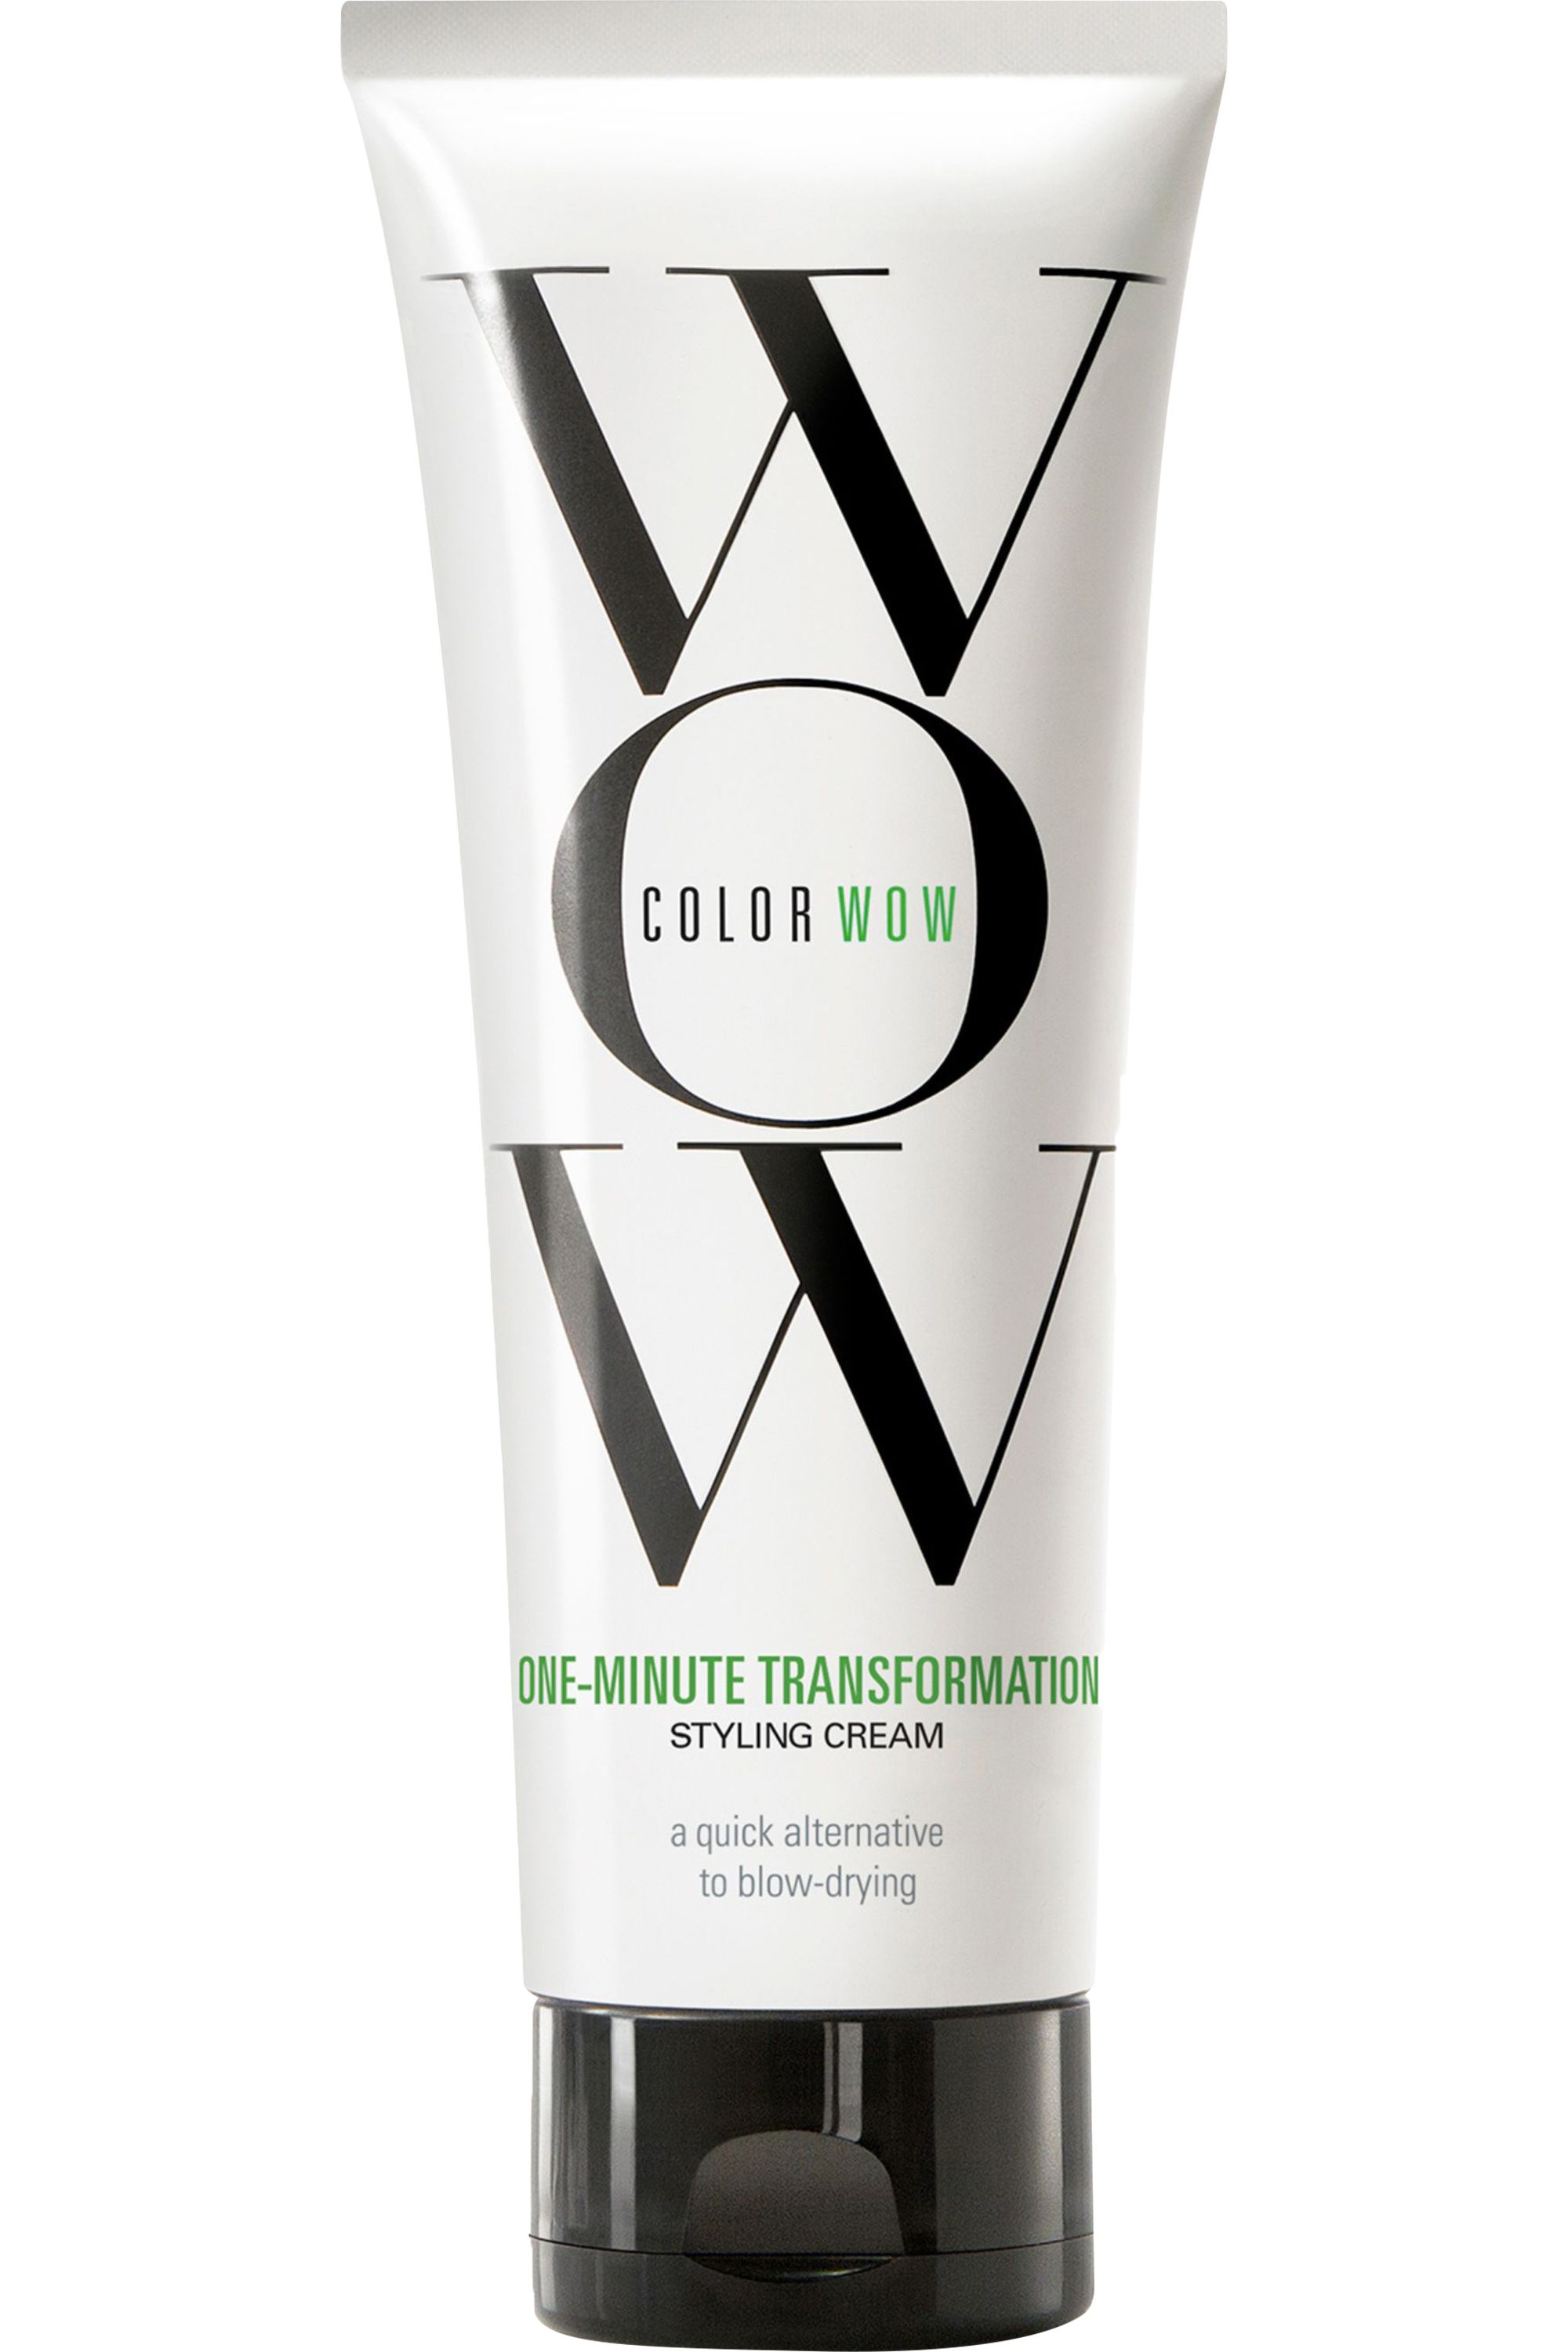 COLOR WOW - Spray brillance & protection thermique Extra - Blissim